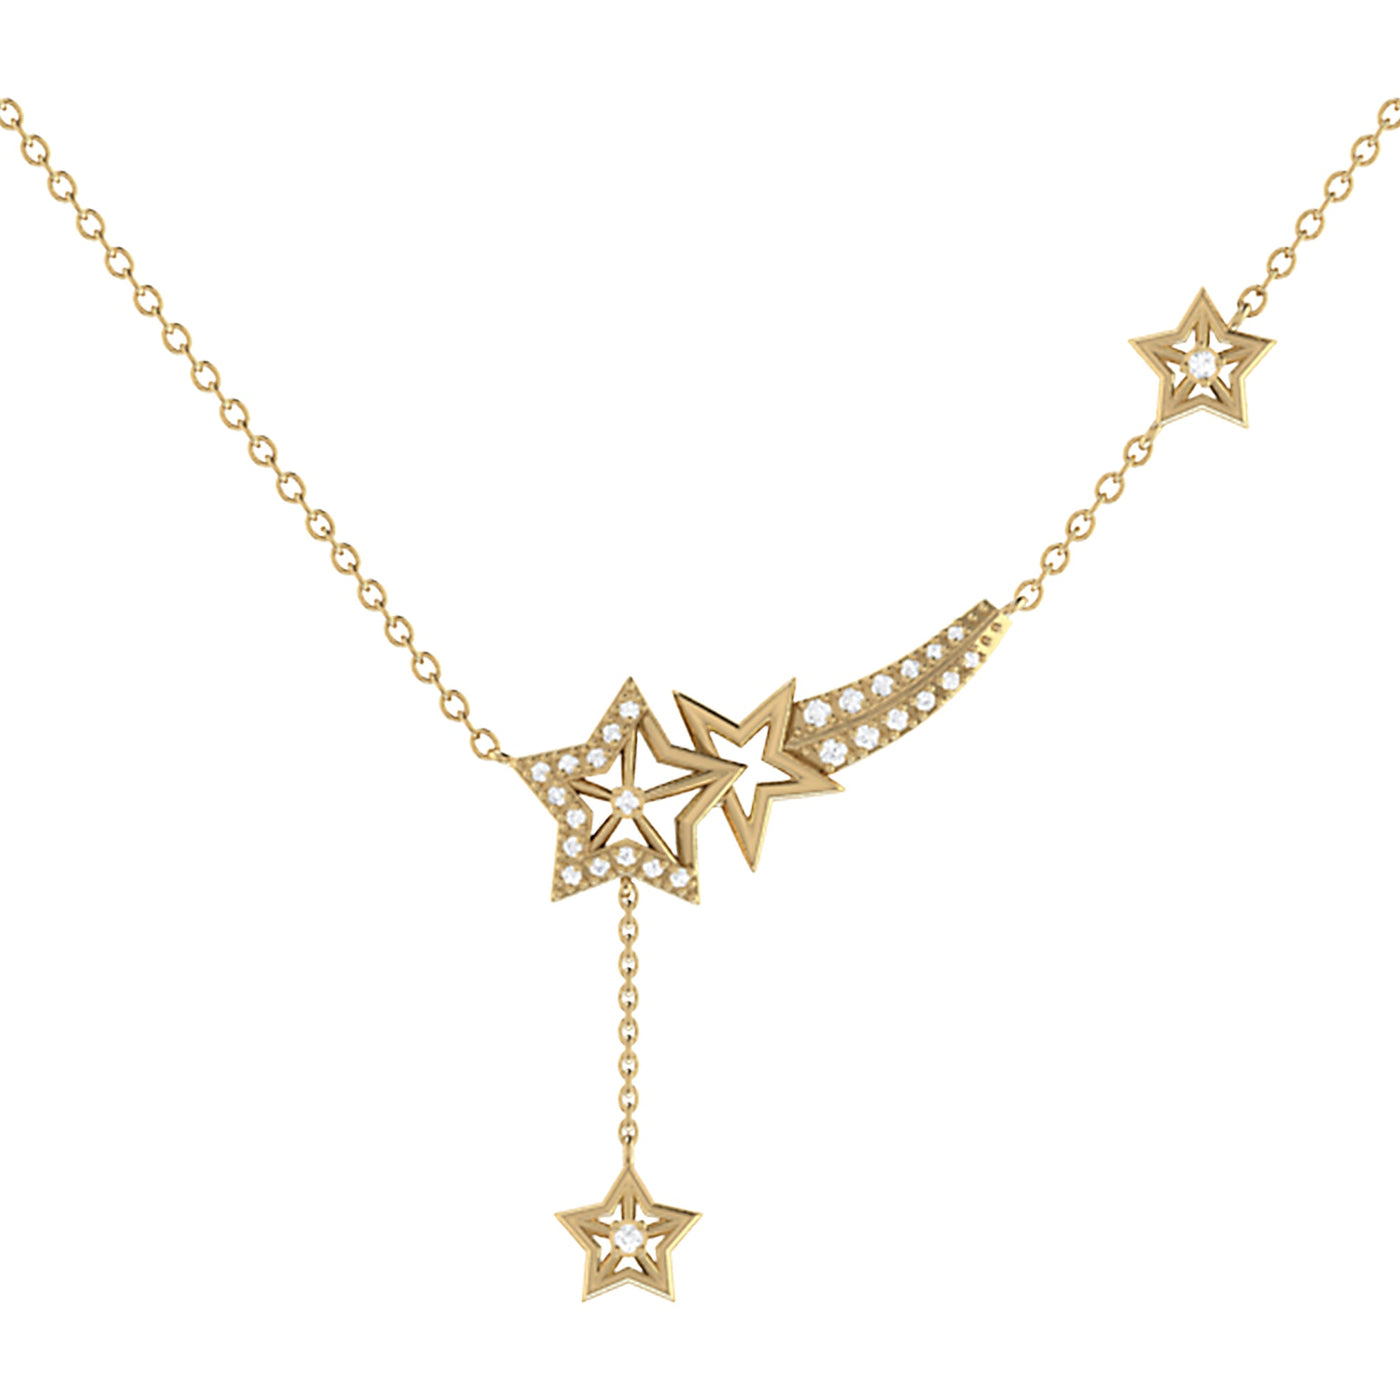 Necklace - Starlight with real diamonds - 14 carat gold plated